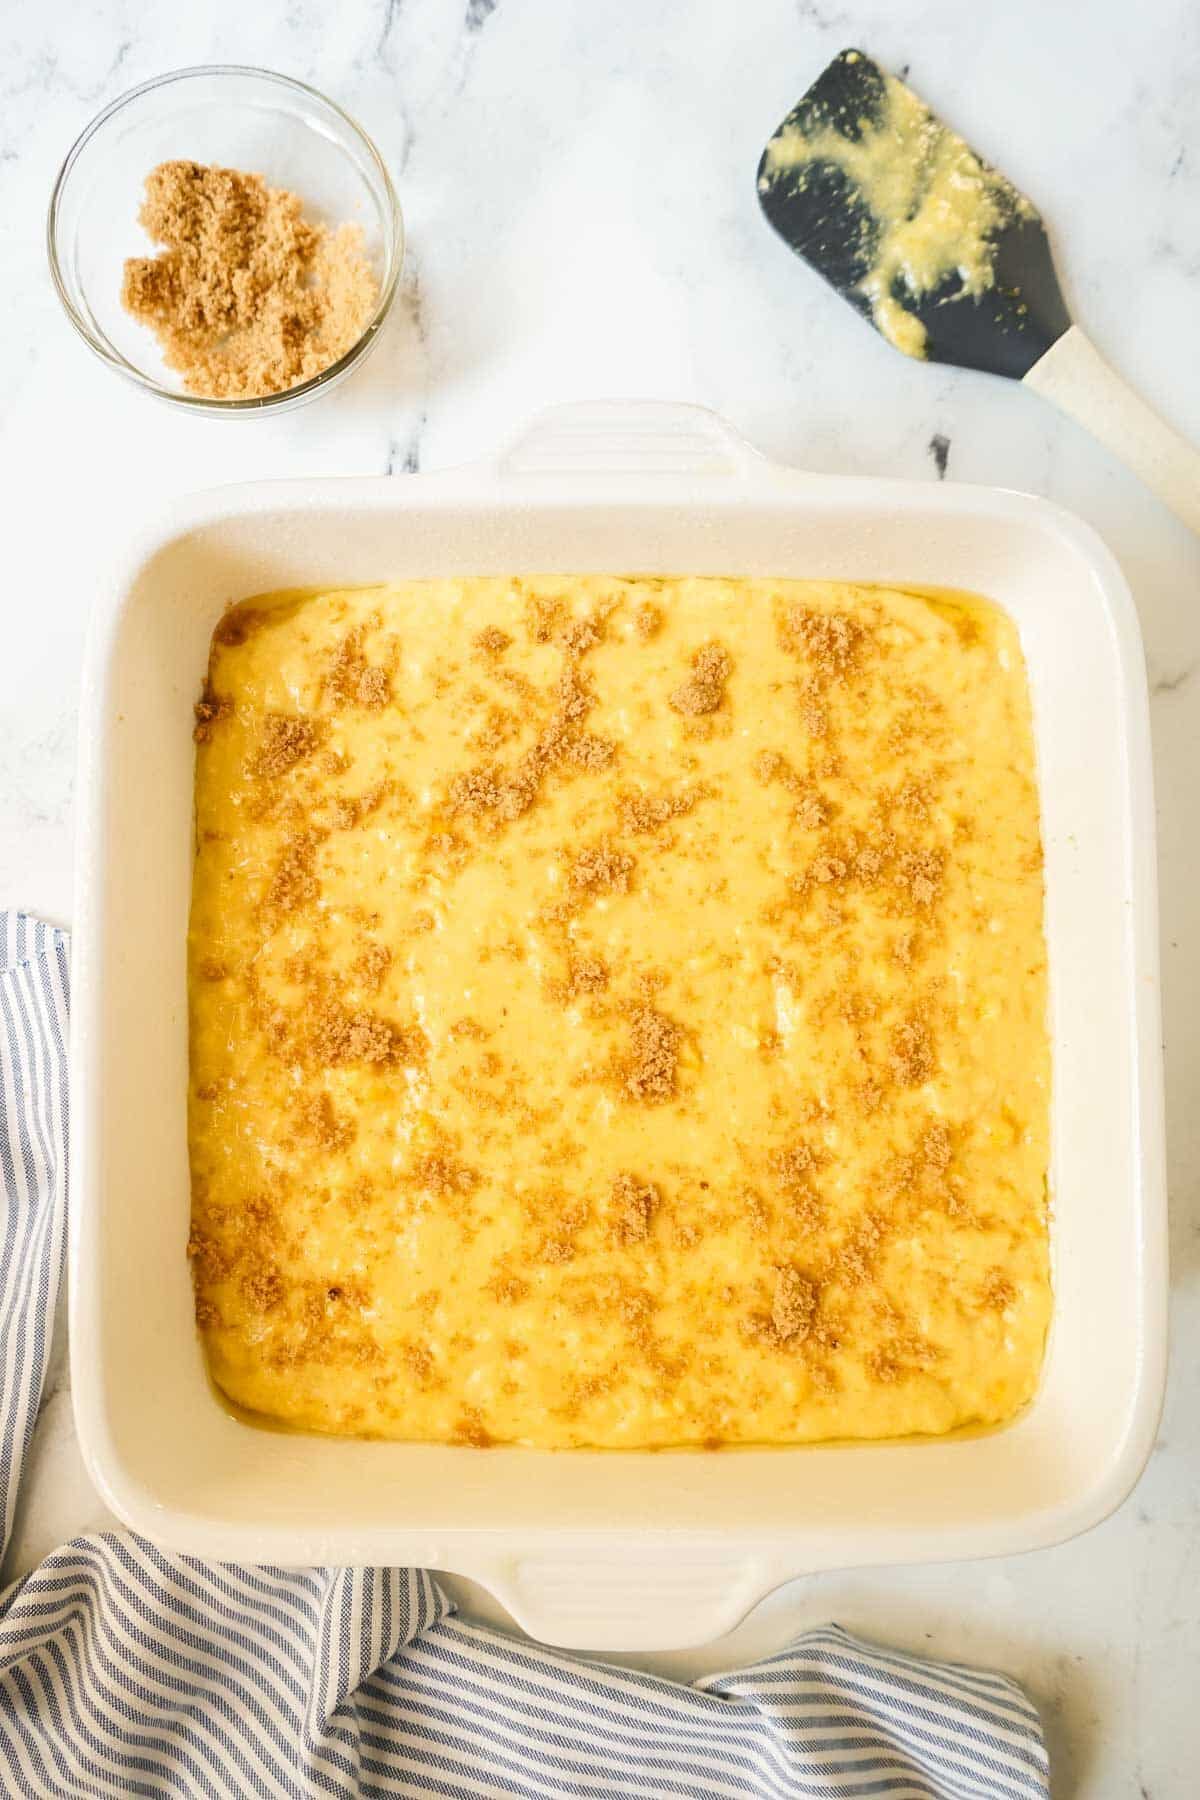 Cornbread batter poured into a white baking dish and sprinkled with brown sugar.